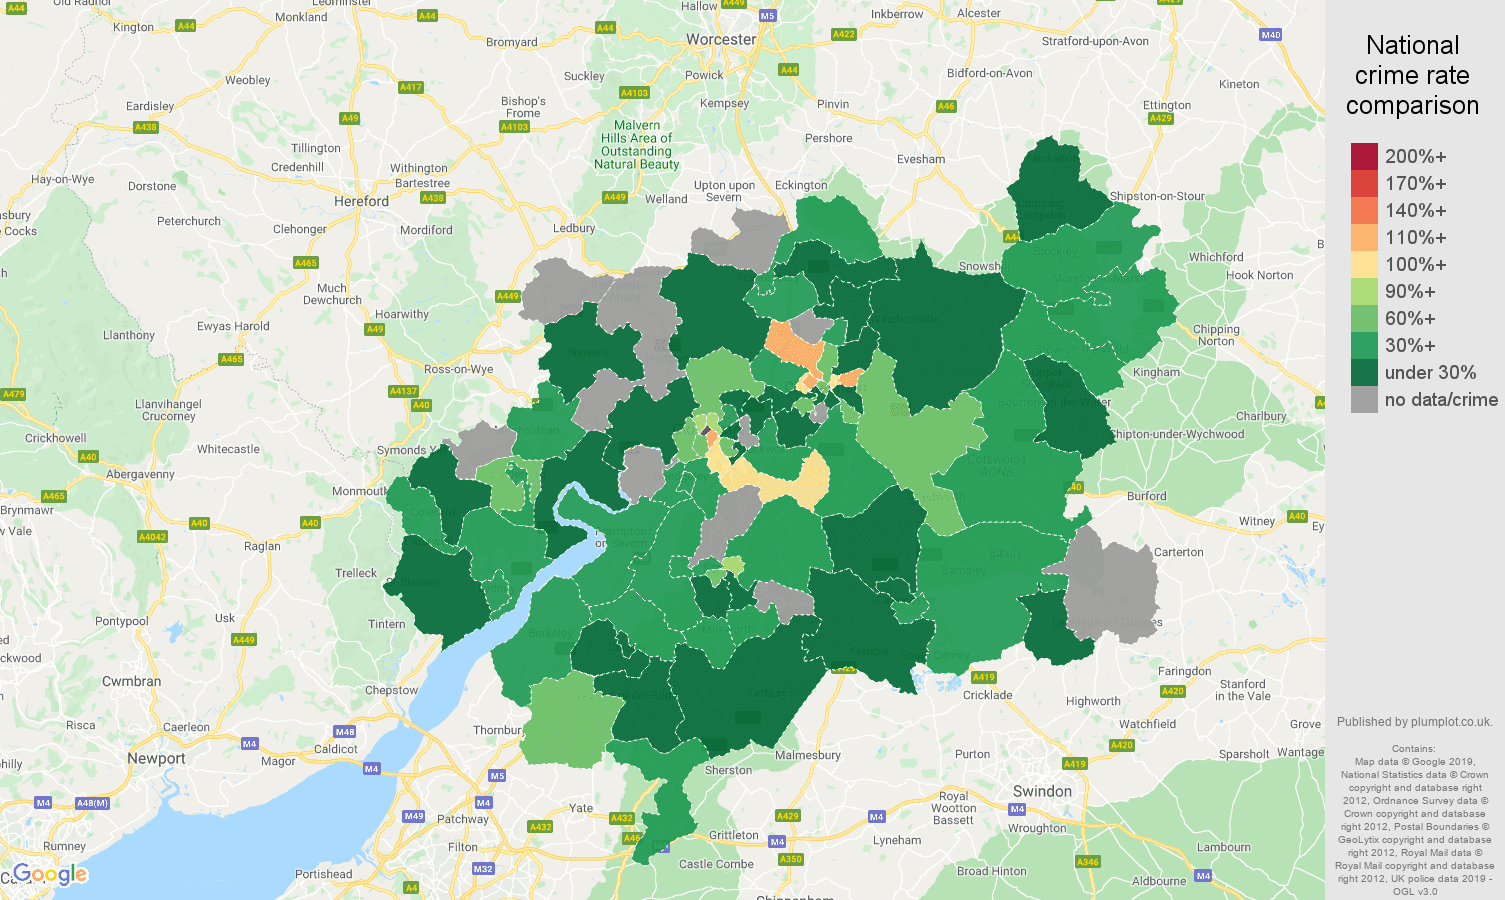 Gloucester other crime rate comparison map